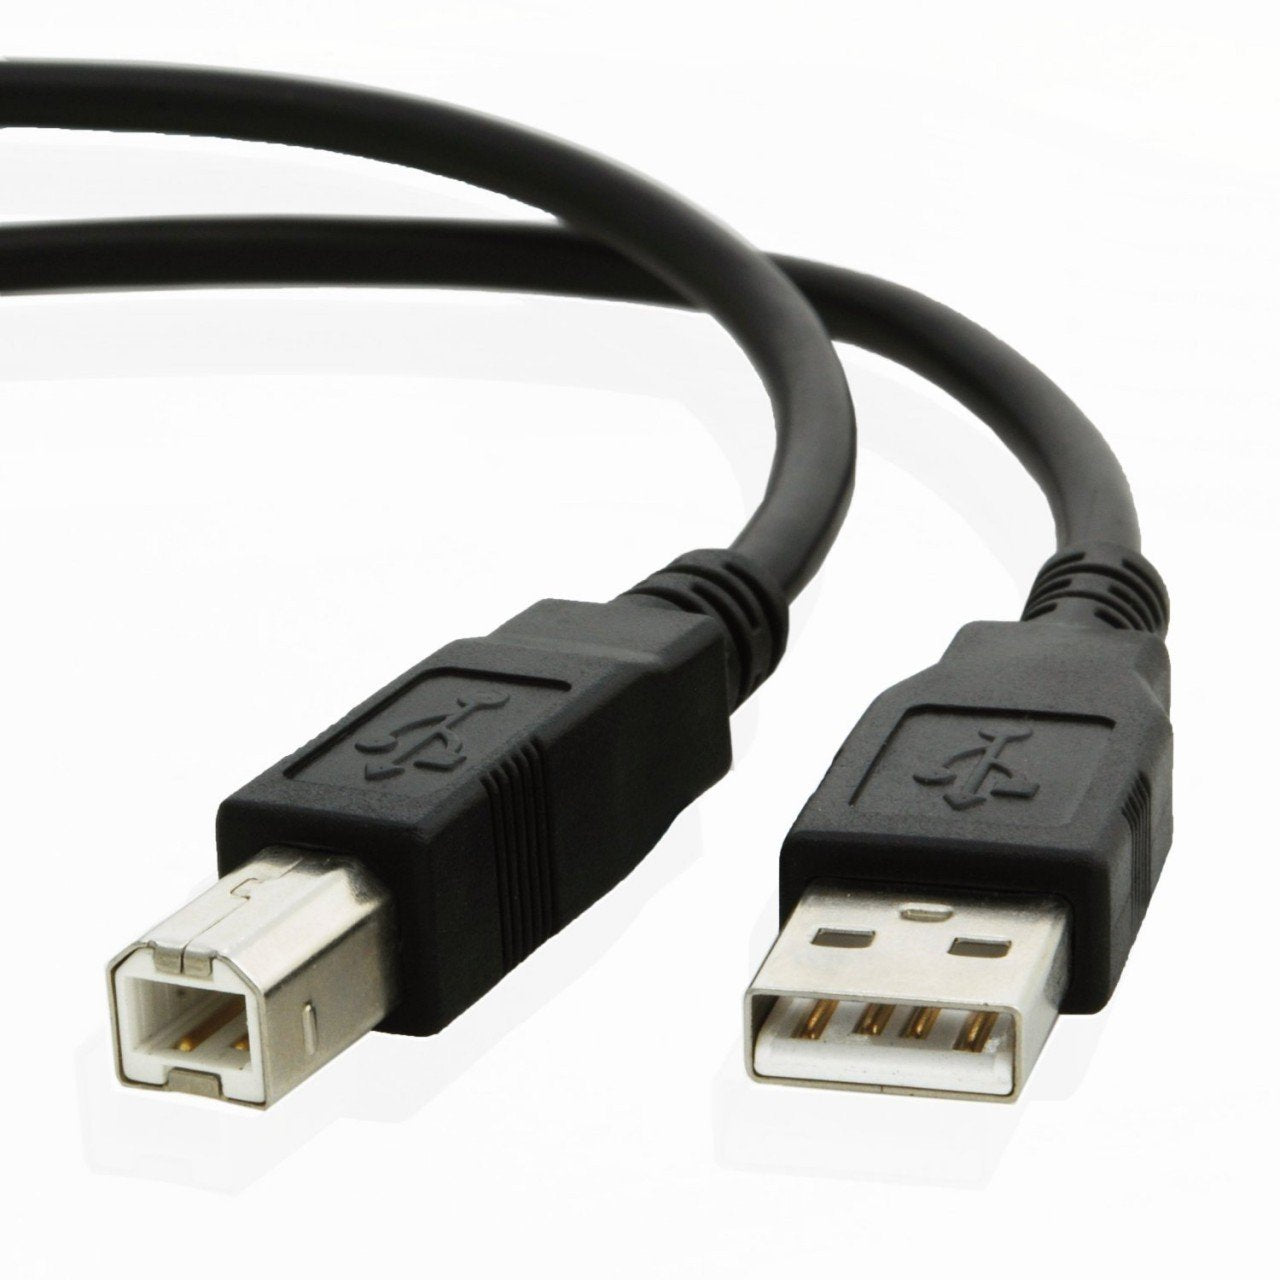 USB cable for Canon PIXMA IP8720